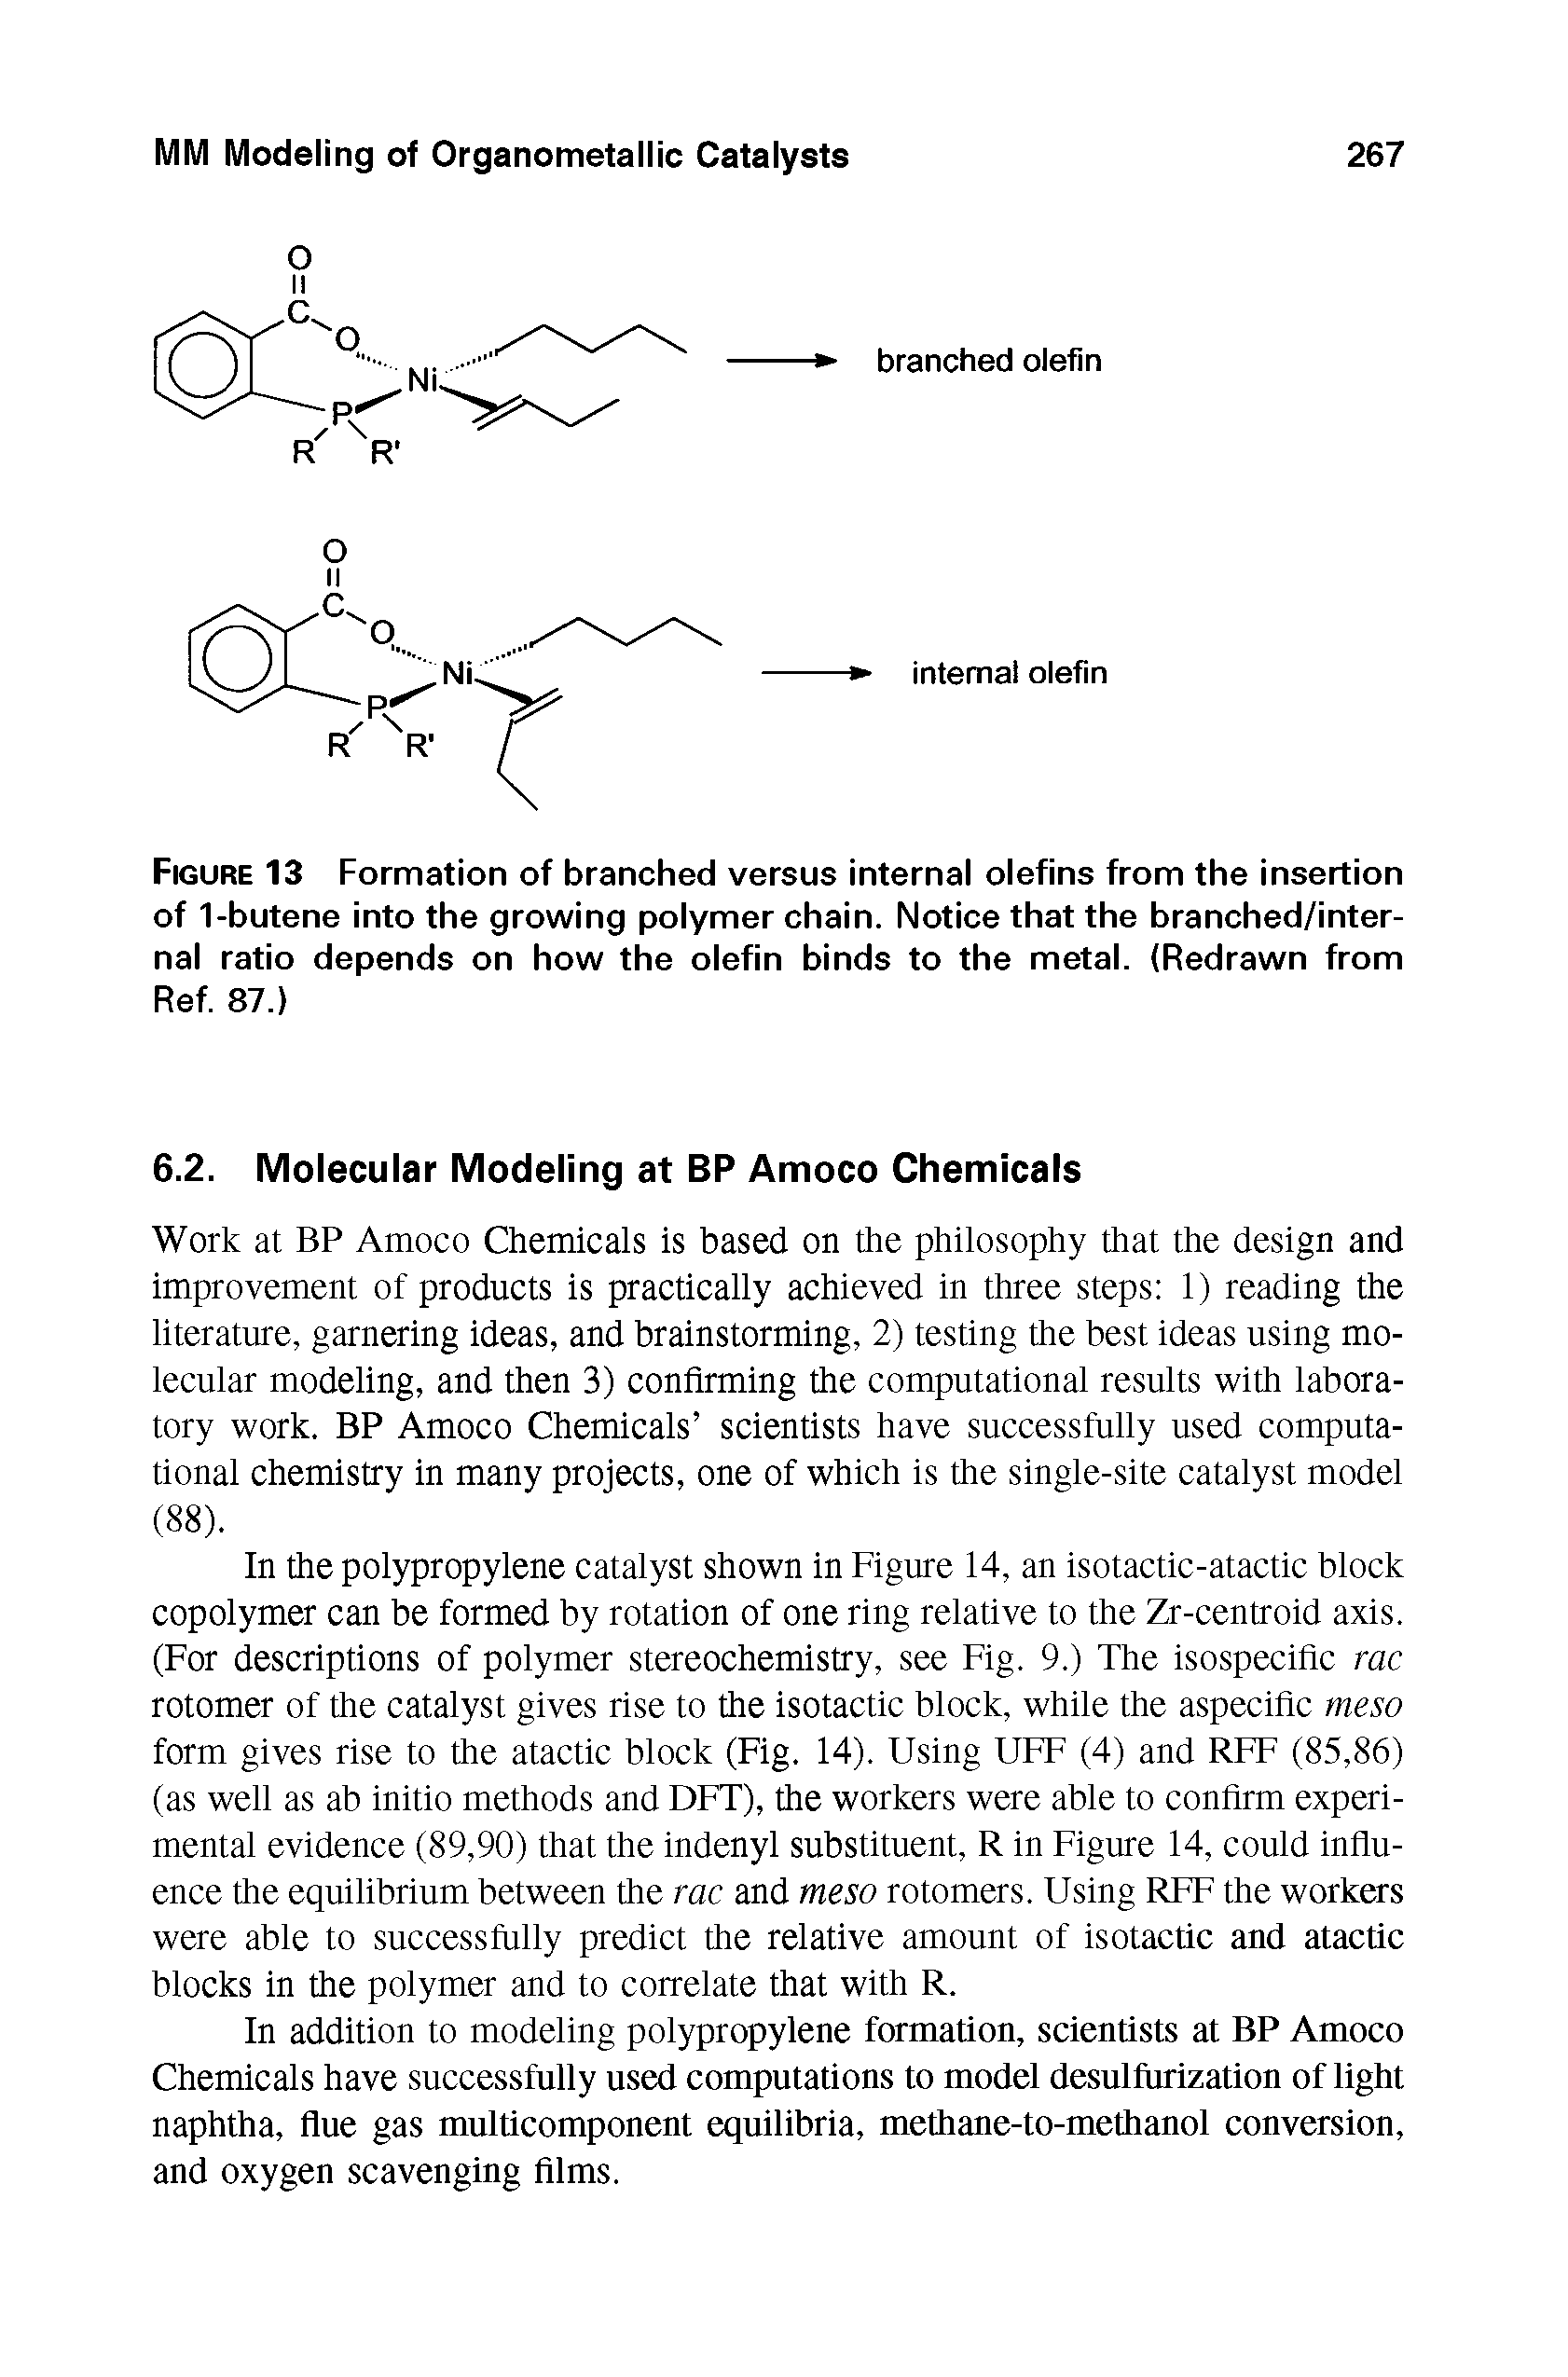 Figure 13 Formation of branched versus internal olefins from the insertion of 1-butene into the growing polymer chain. Notice that the branched/inter-nal ratio depends on how the olefin binds to the metal. (Redrawn from Ref. 87.)...